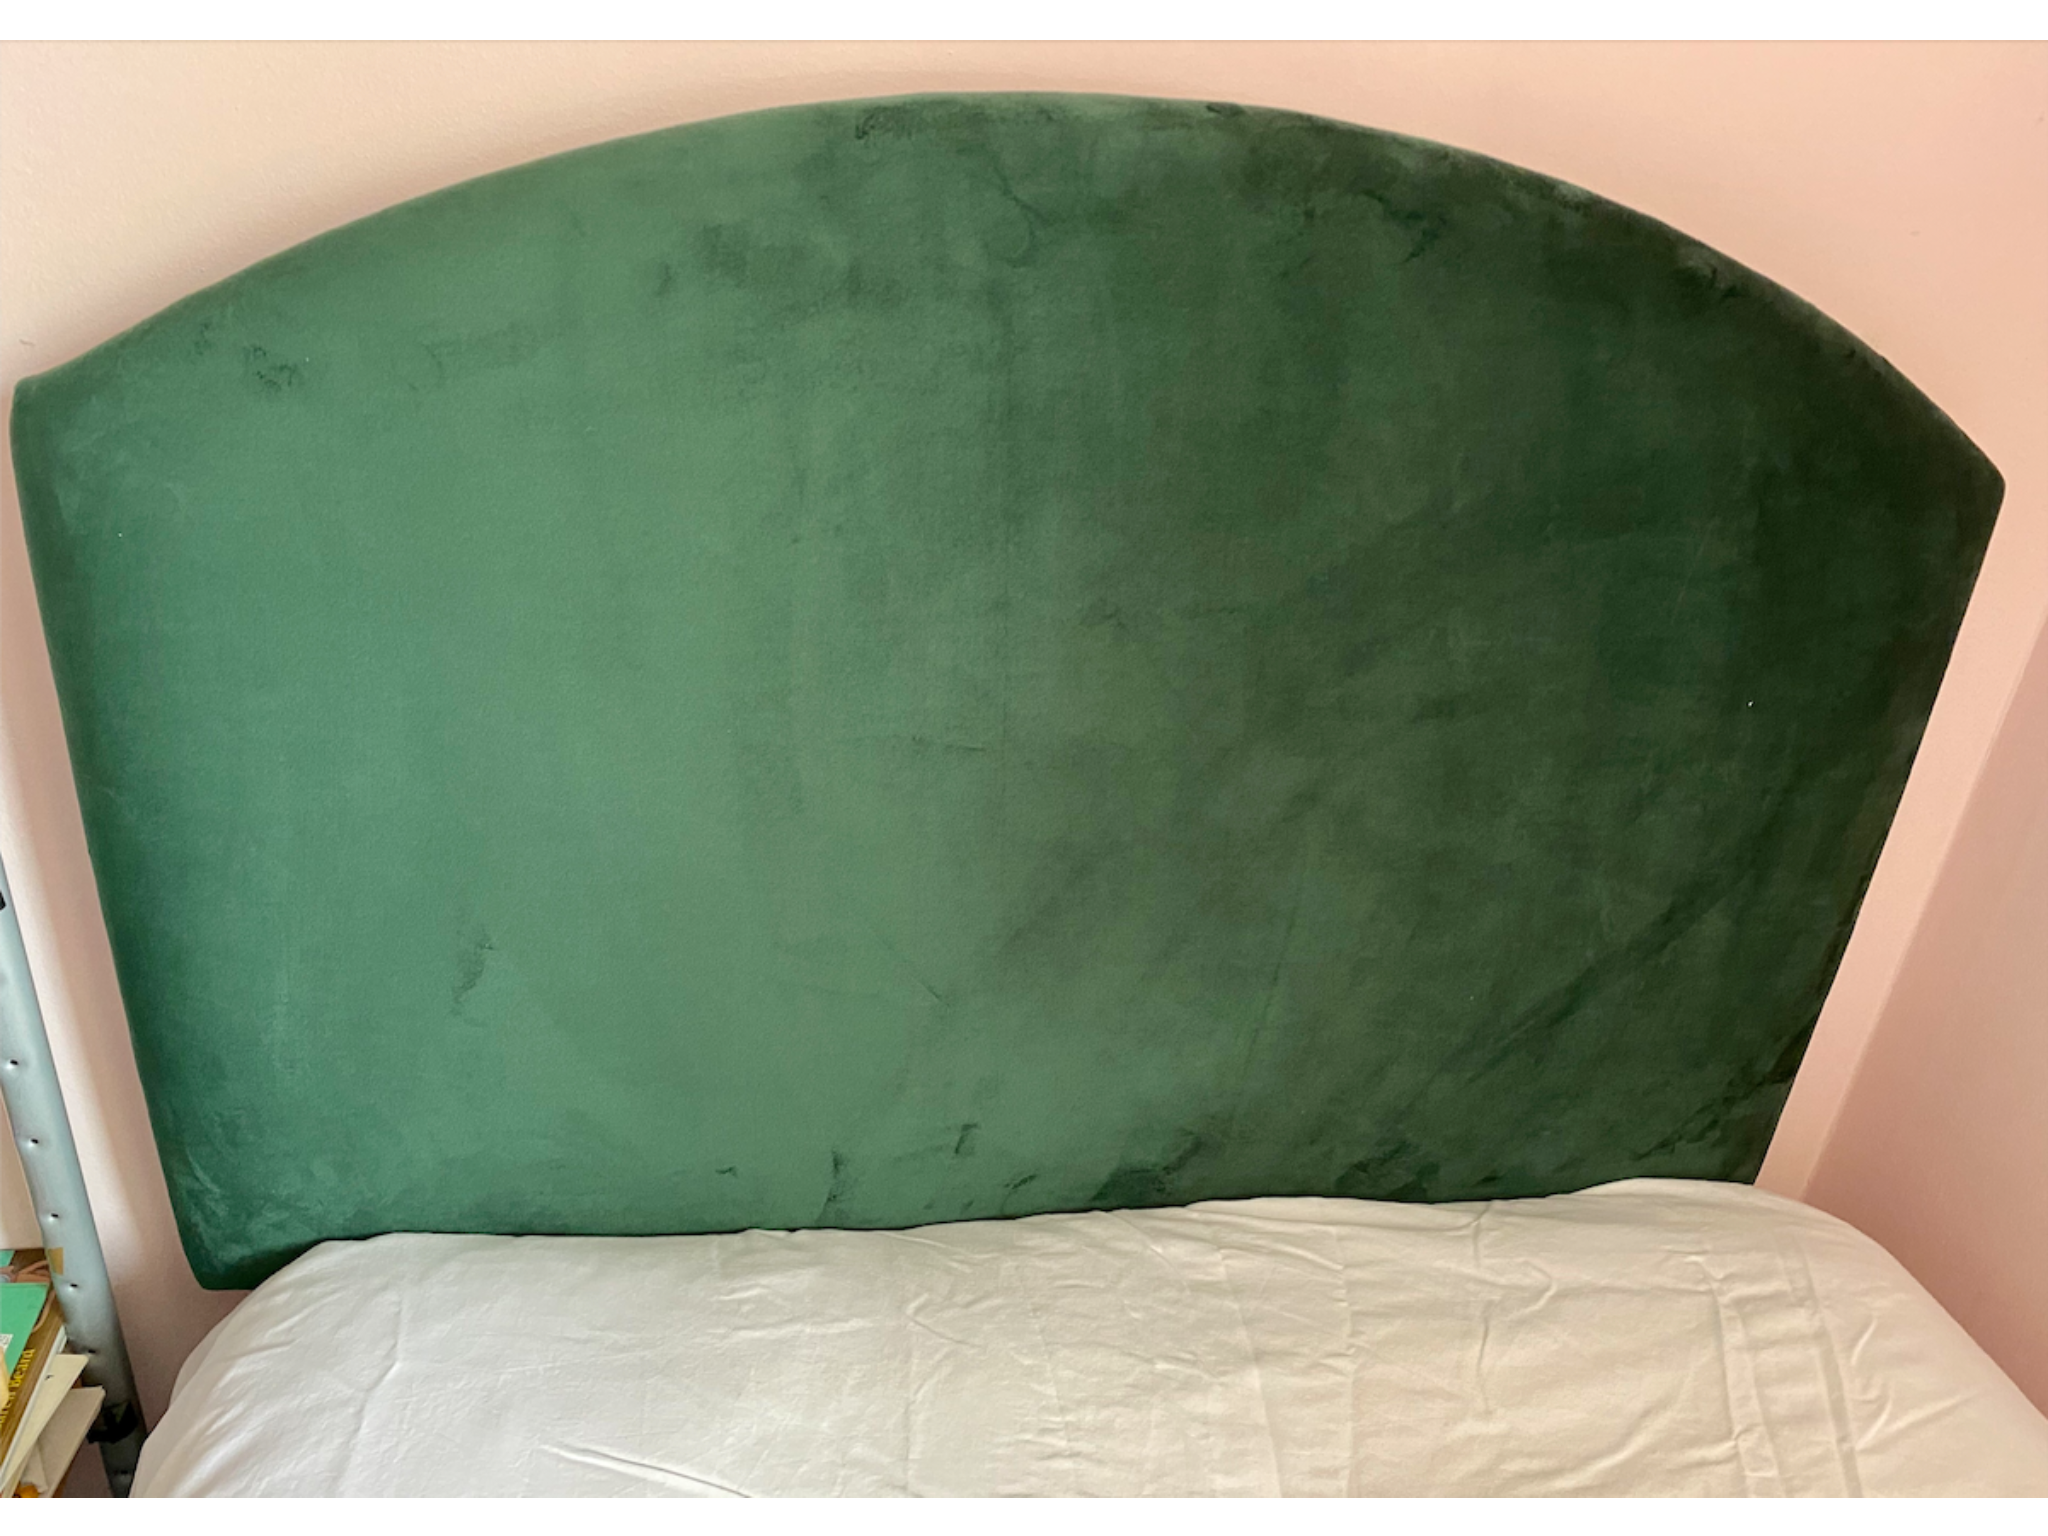 An example of the tried and tested headboards we put to the test